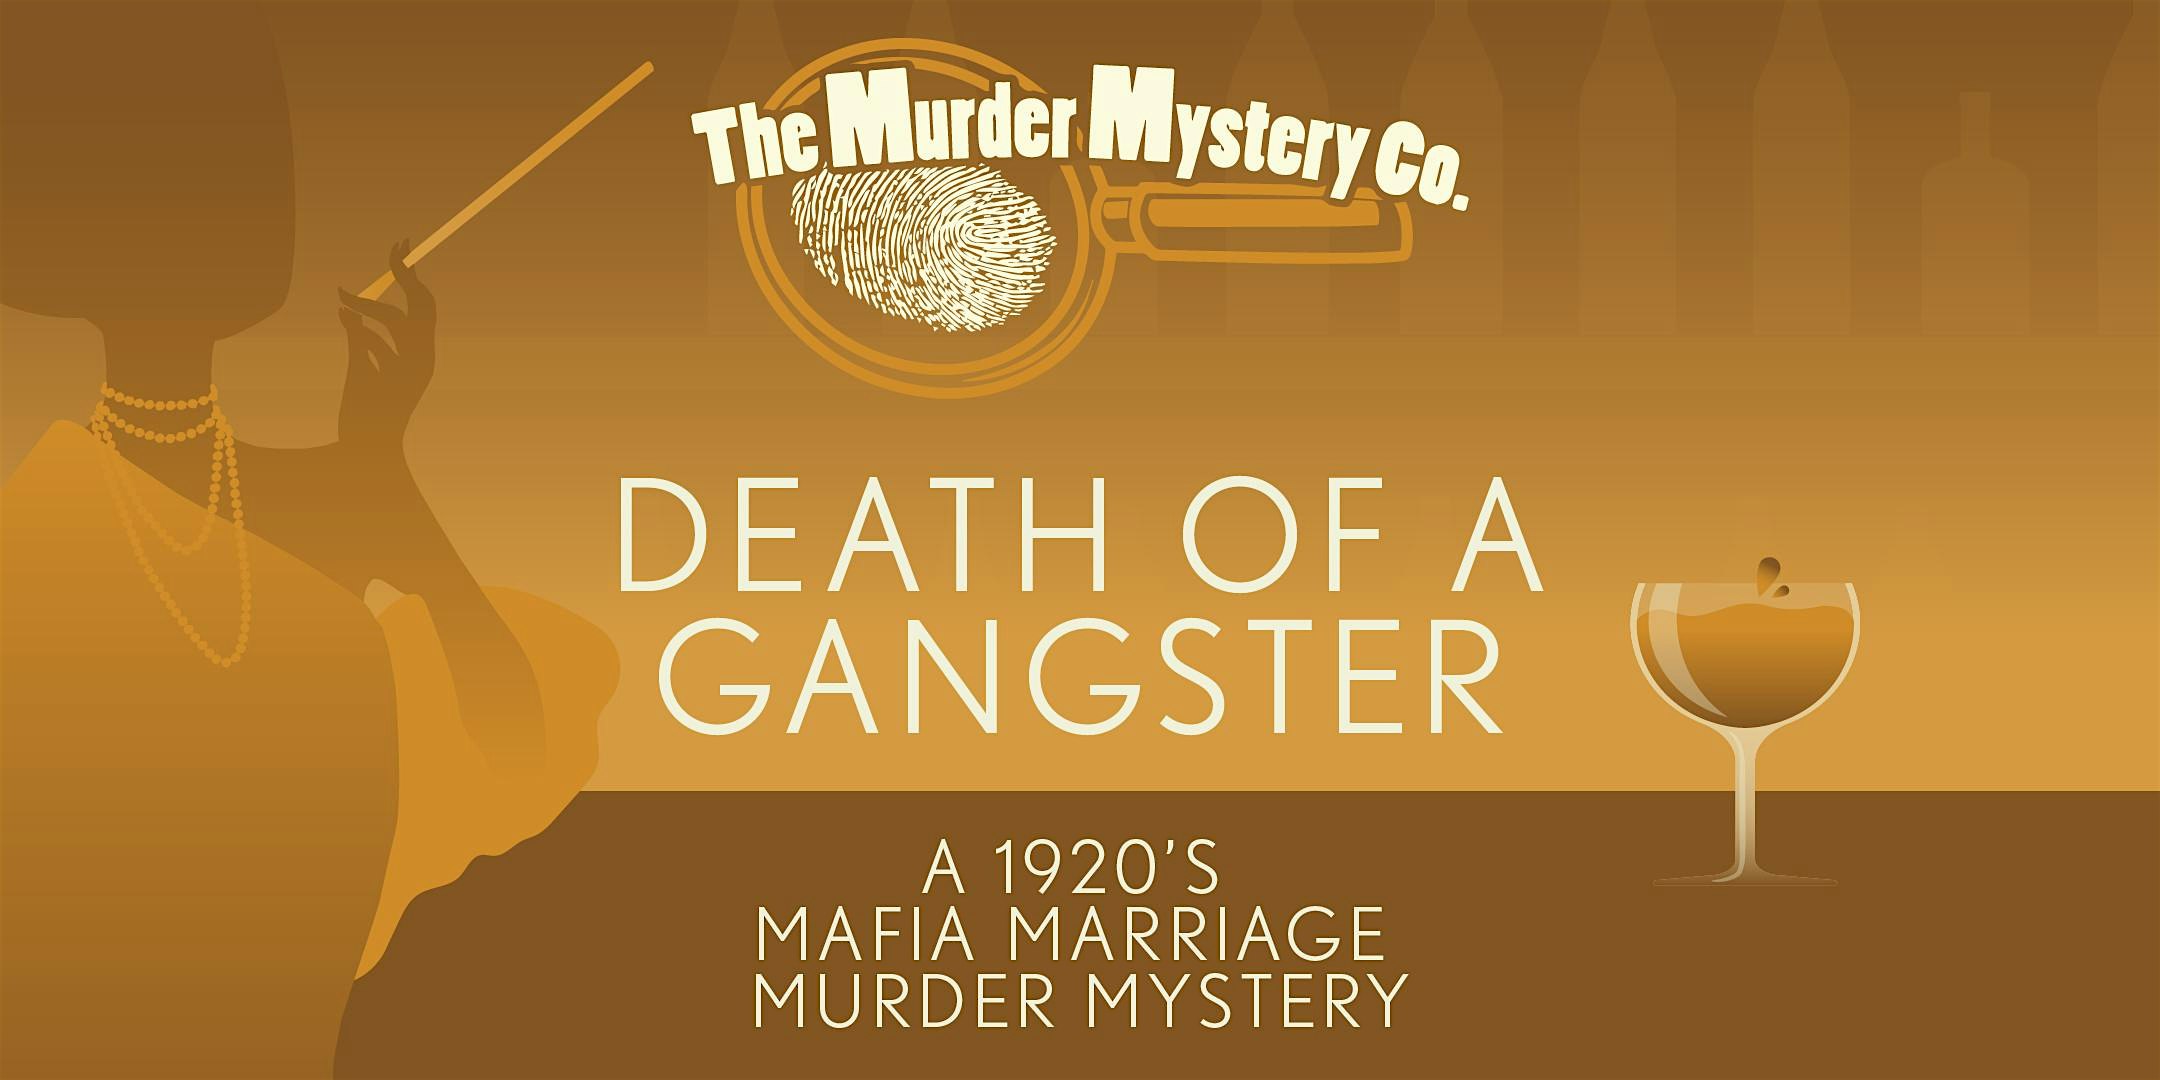 Murder Mystery Dinner Theater Show in Atlanta/Little 5: Death of a Gangster